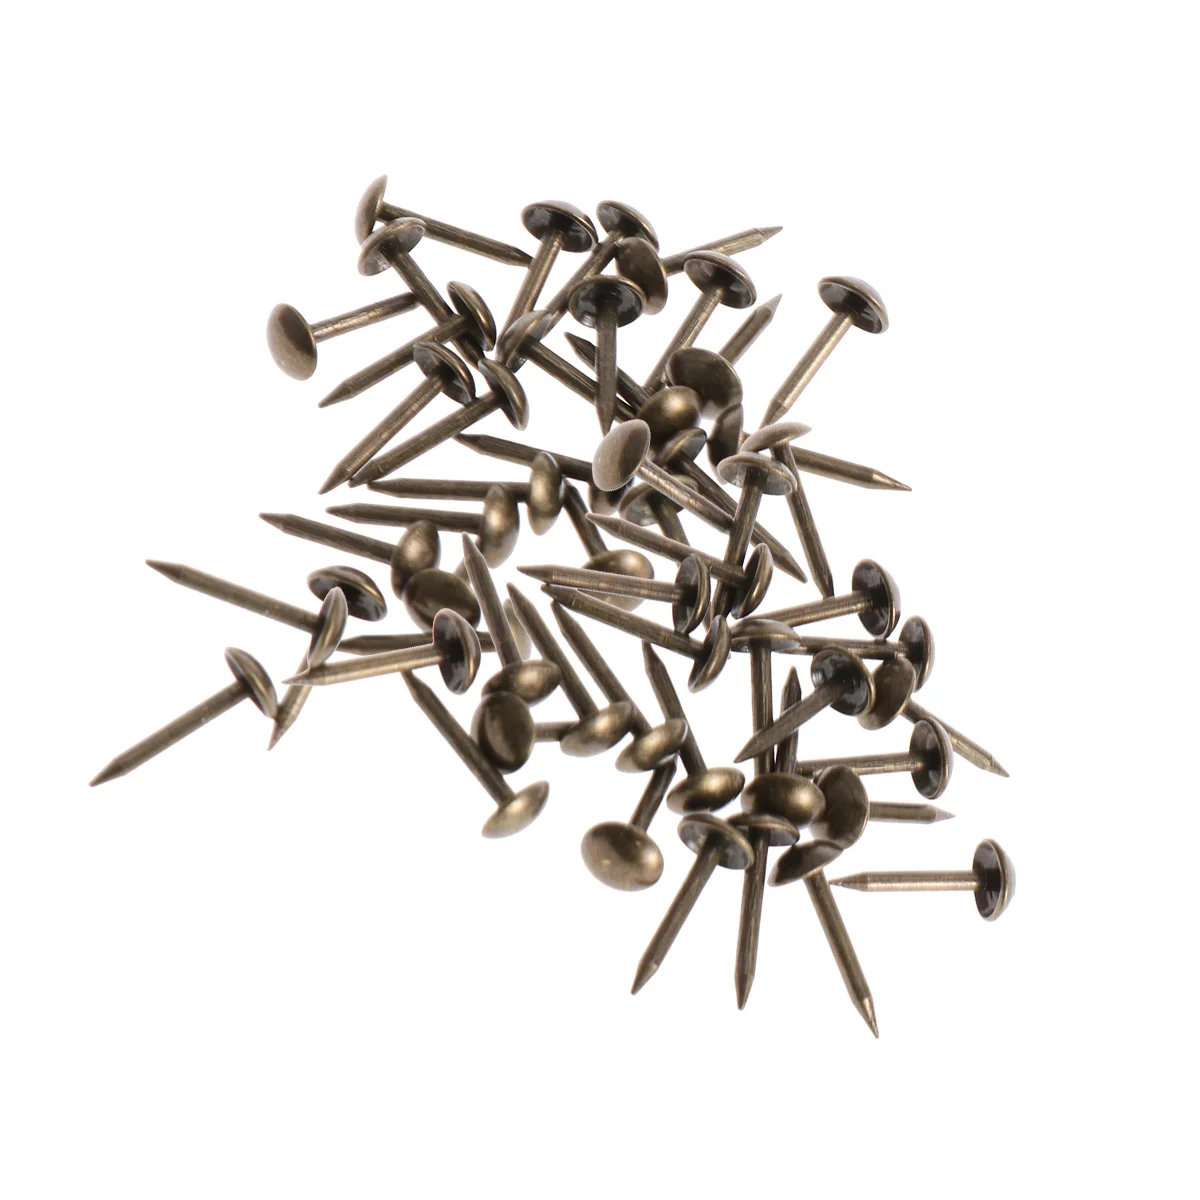 

100PCS Tack Classical Large-headed Iron 6x14mm Round Tack for Door